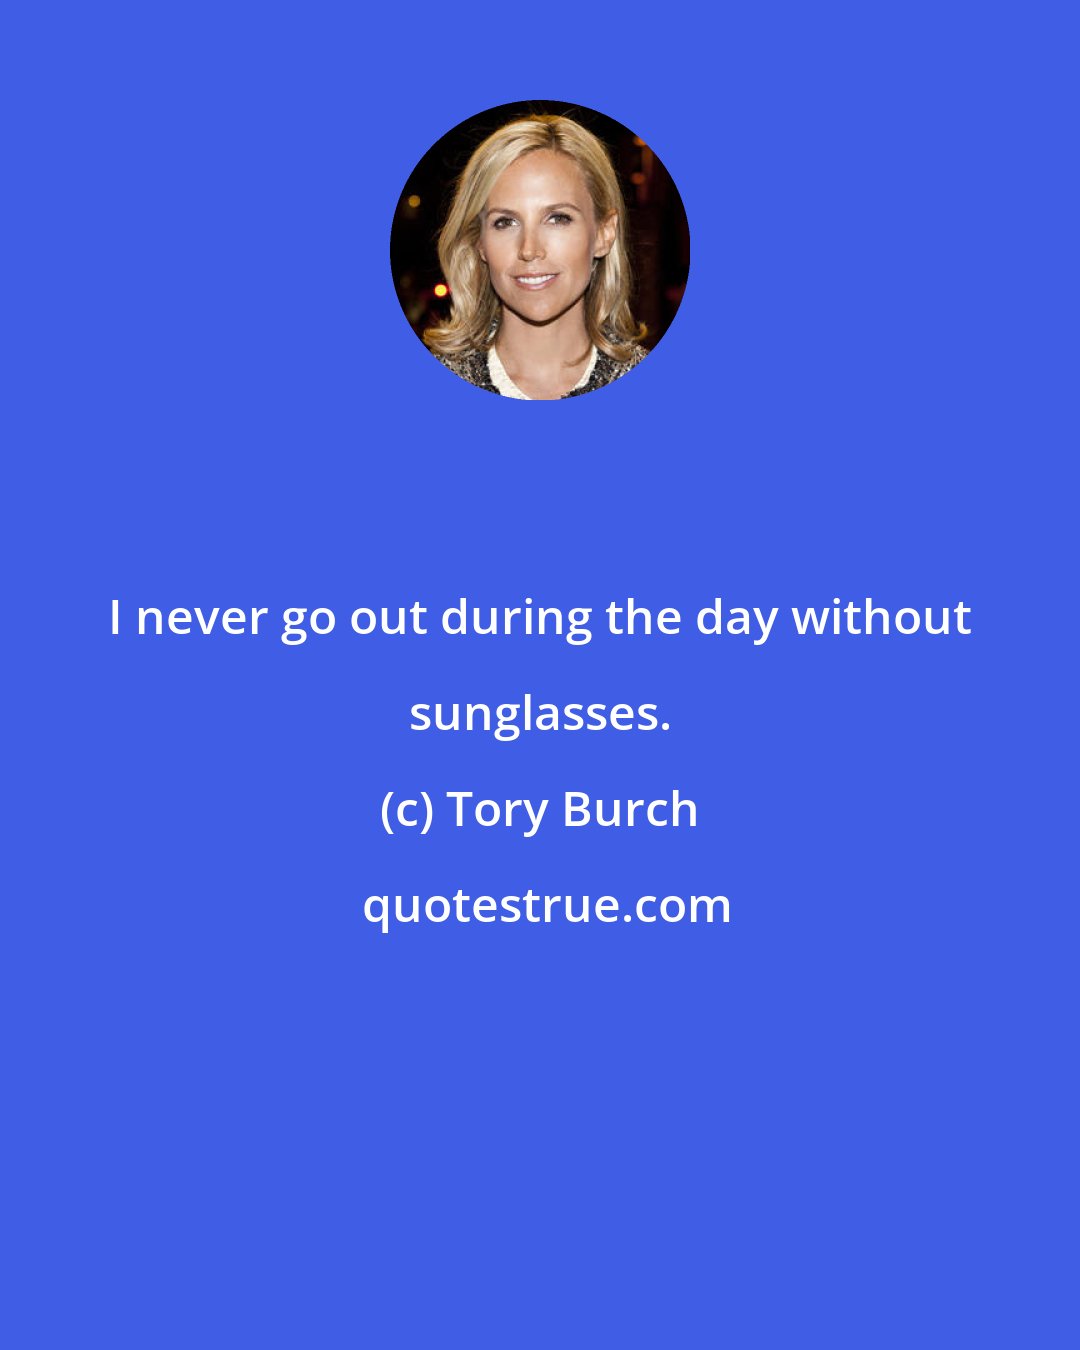 Tory Burch: I never go out during the day without sunglasses.